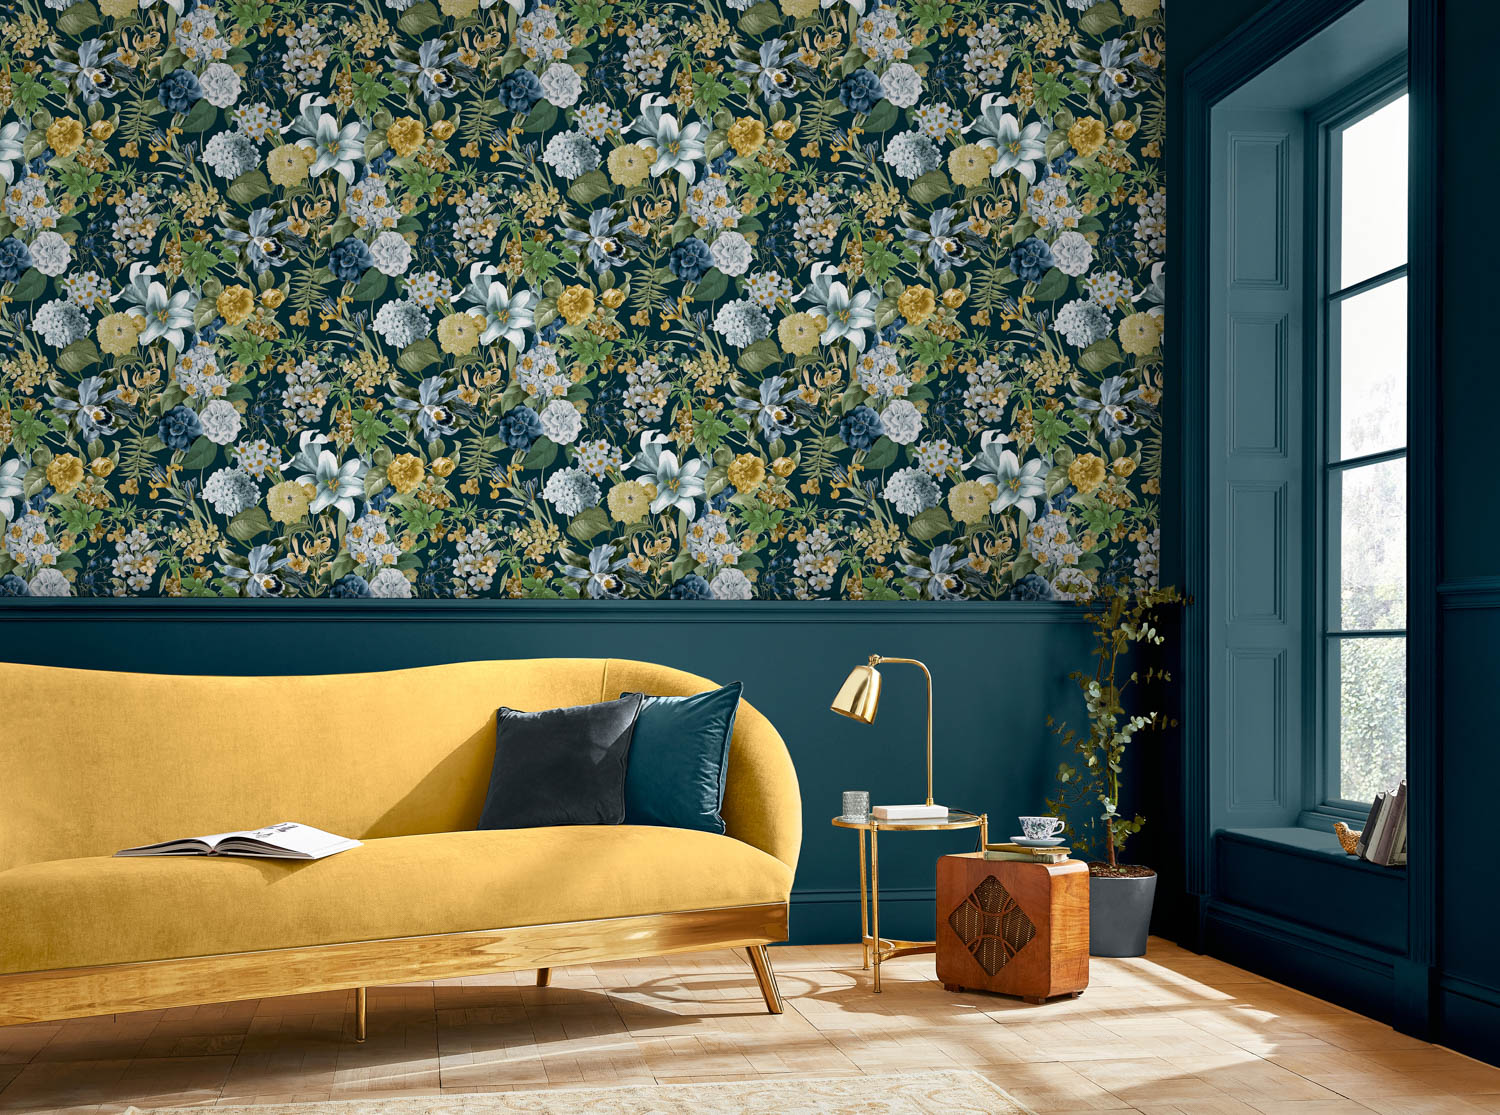 blue, green, and yellow floral wallpaper behind a yellow couch